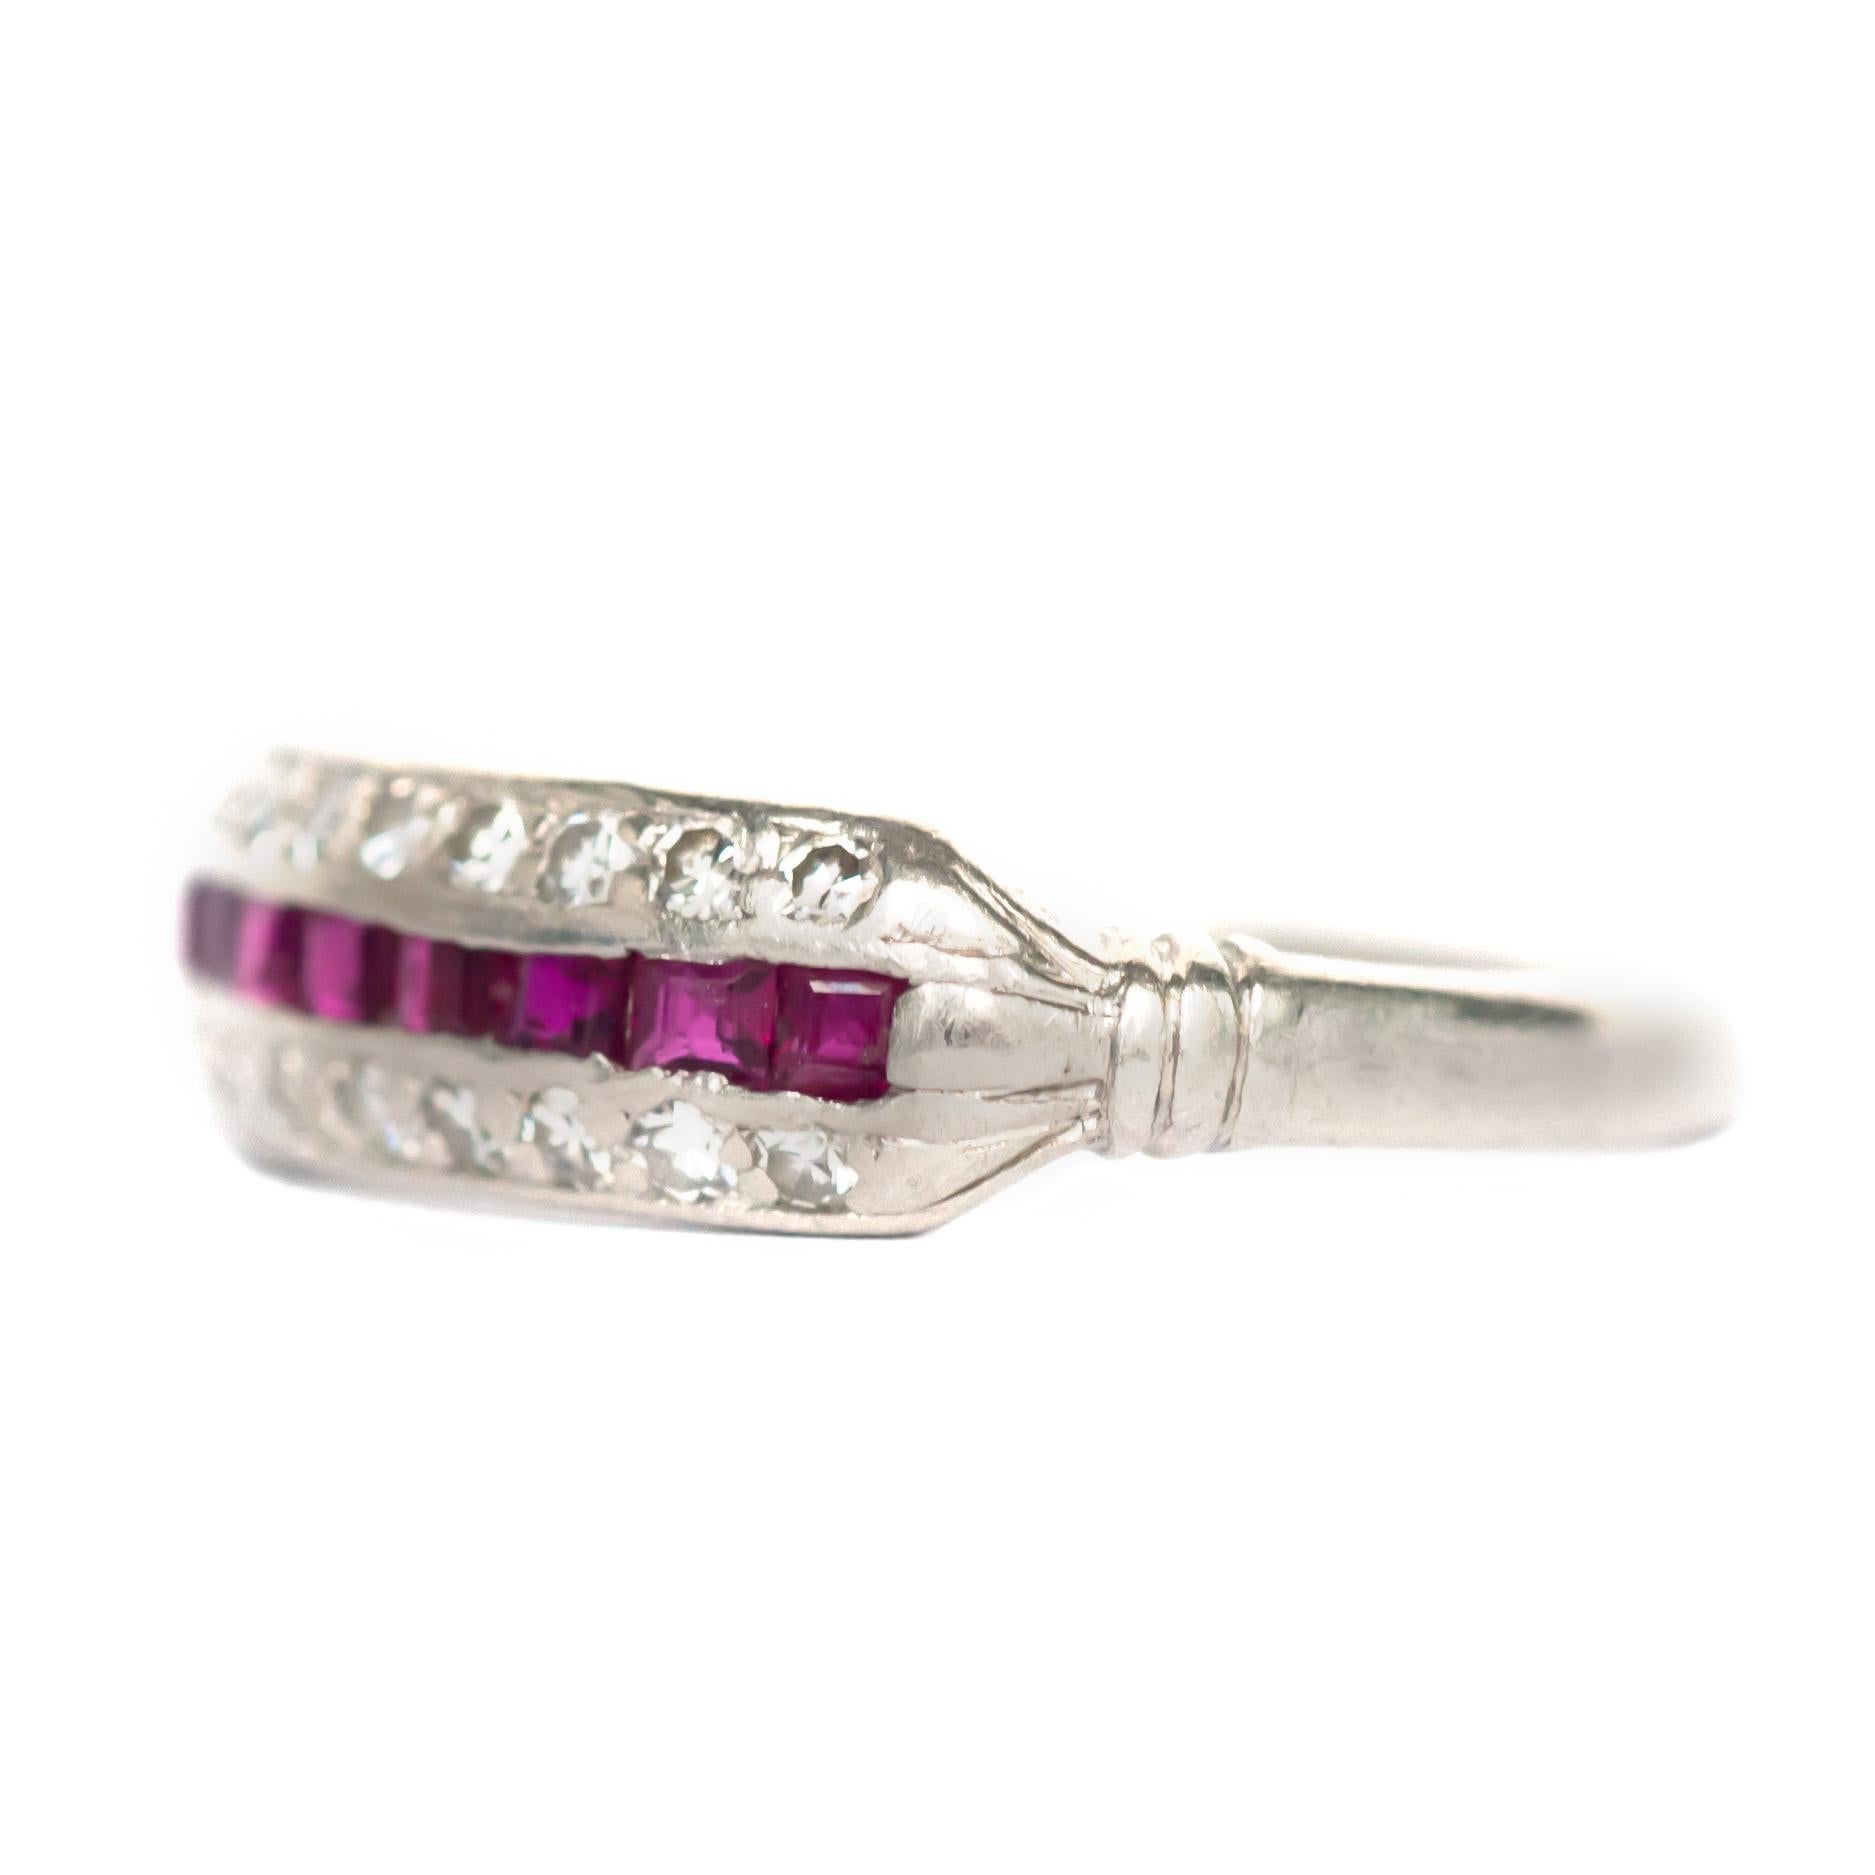 Ring Size: 5.5
Metal Type: Platinum
Weight: 3.7 grams

Center Diamond Details
Shape: French Cut 
Carat Weight: .30 carat total weight
Color: Natural Ruby

Side Stone Details: 
Shape: Antique Single Cut 
Total Carat Weight: .20 carat total